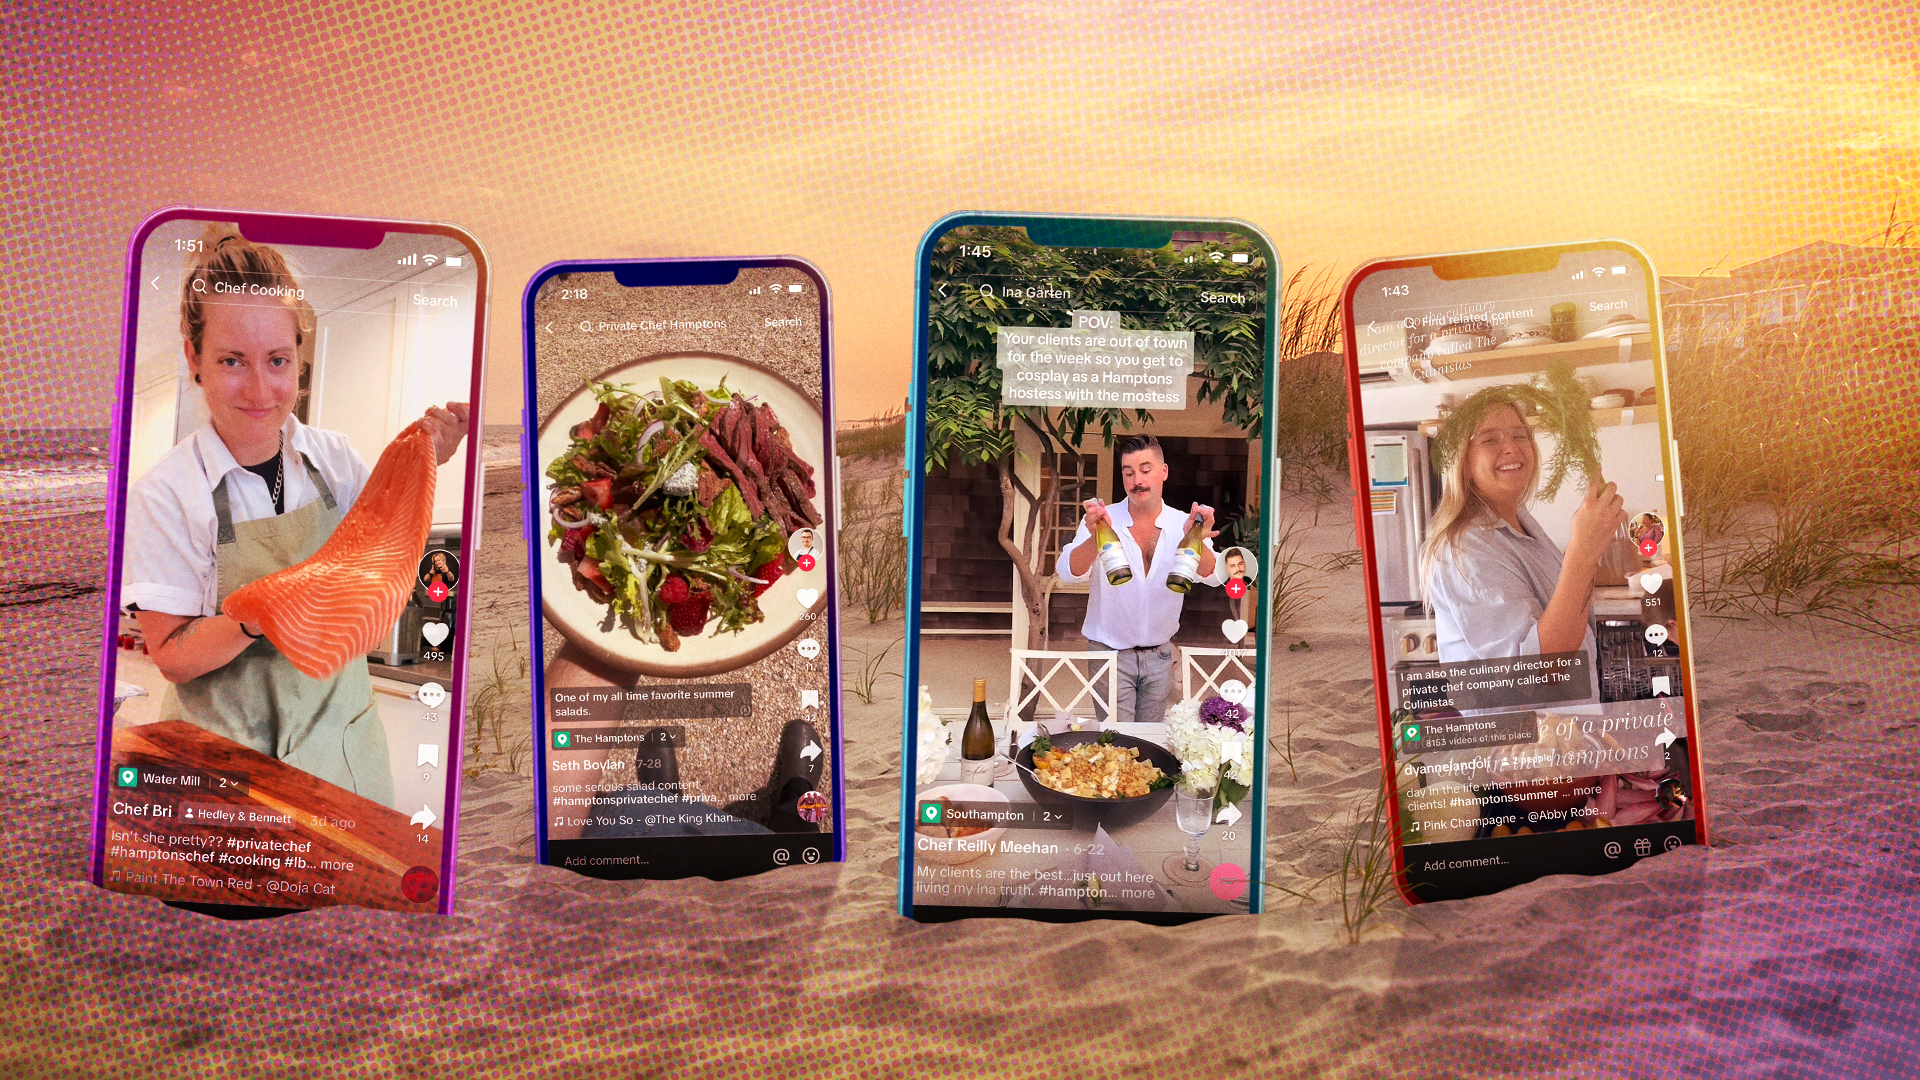 Private chef in the Hamptons TikToks displayed on phones on a Hamptons beach.